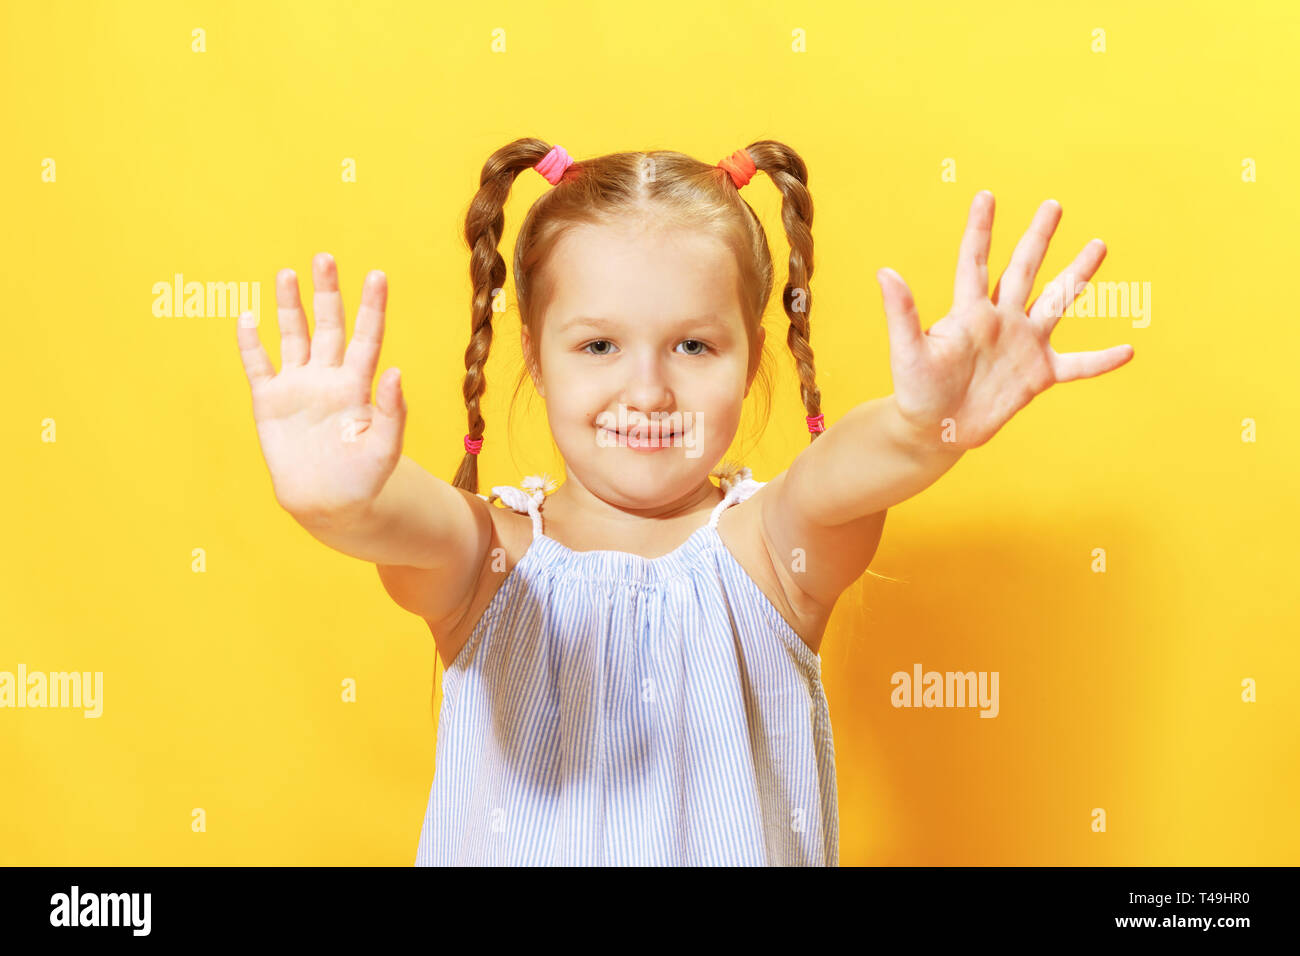 Portrait of a funny little girl on a yellow background. Preschool child shows palm. Stock Photo